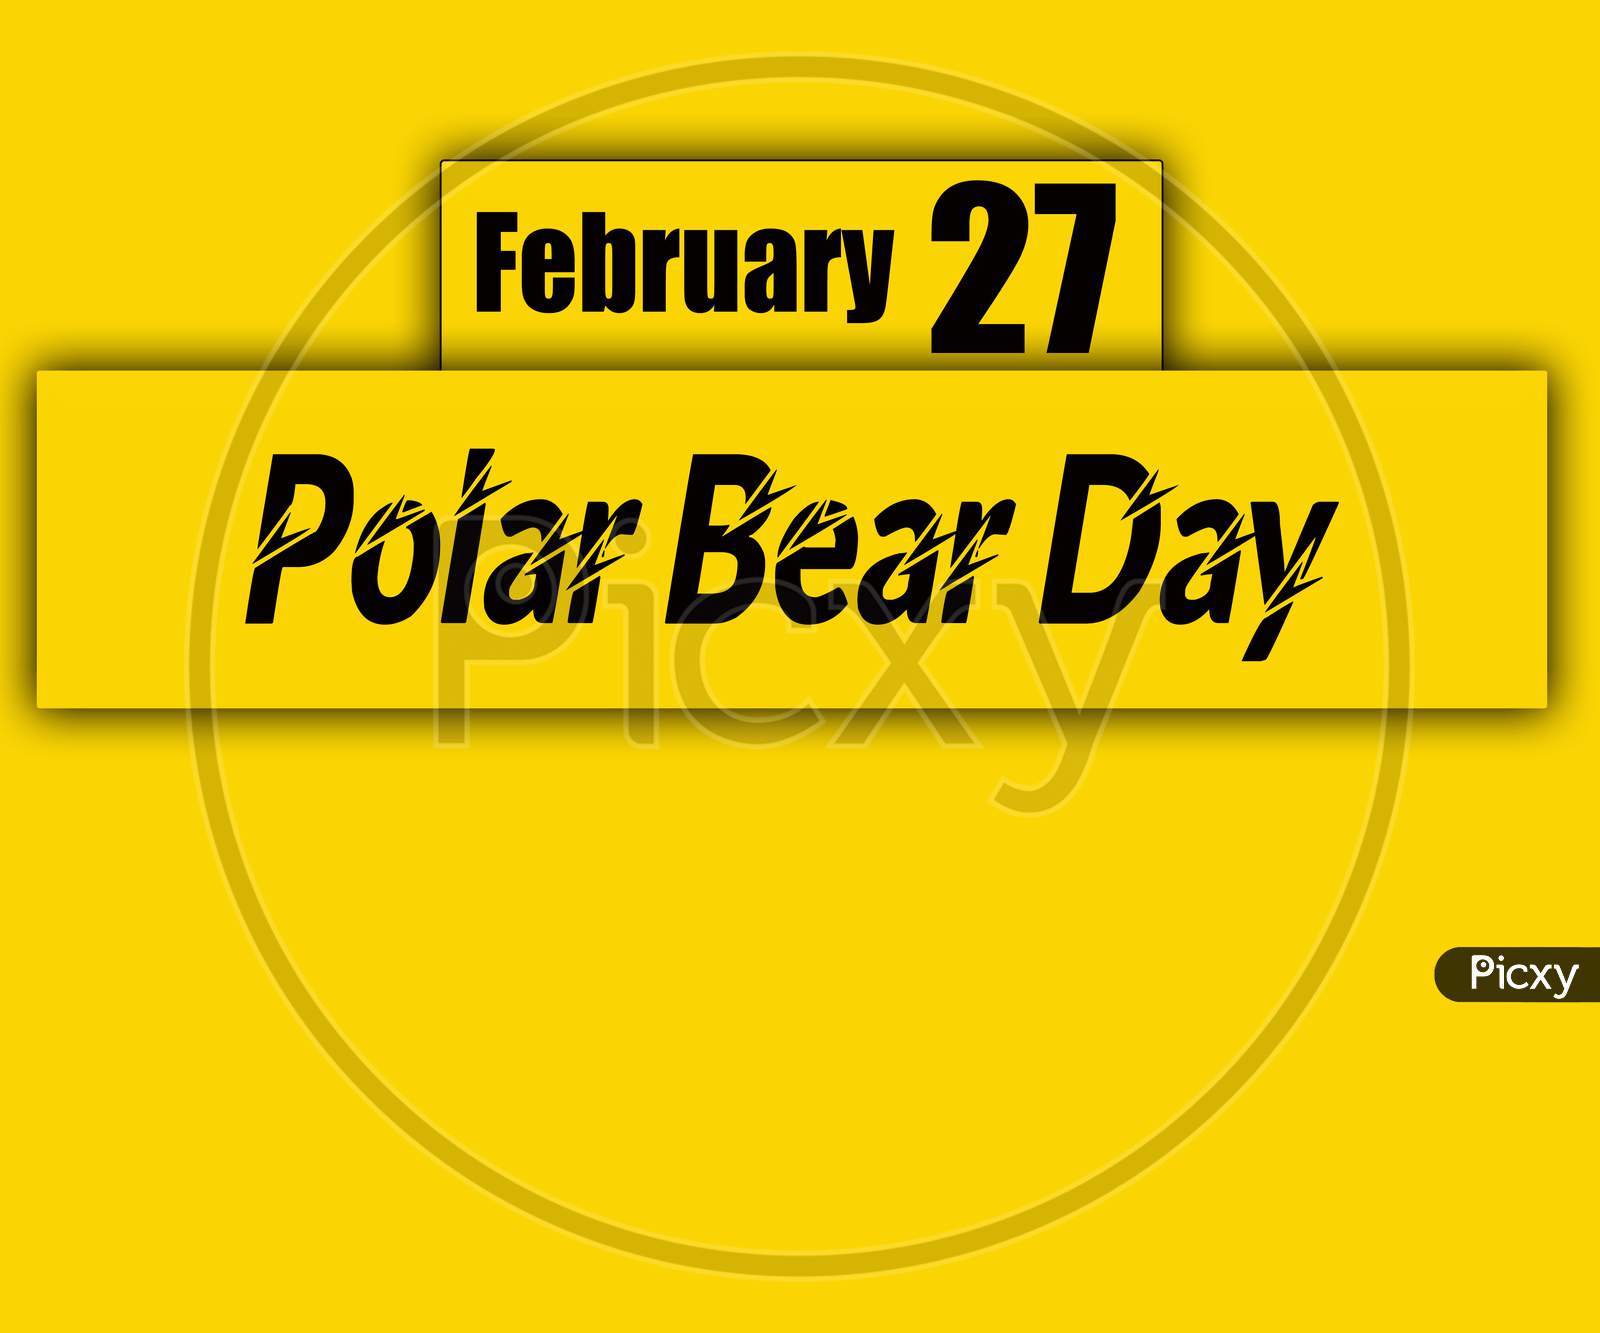 February 27 is THE No-Brainer Day